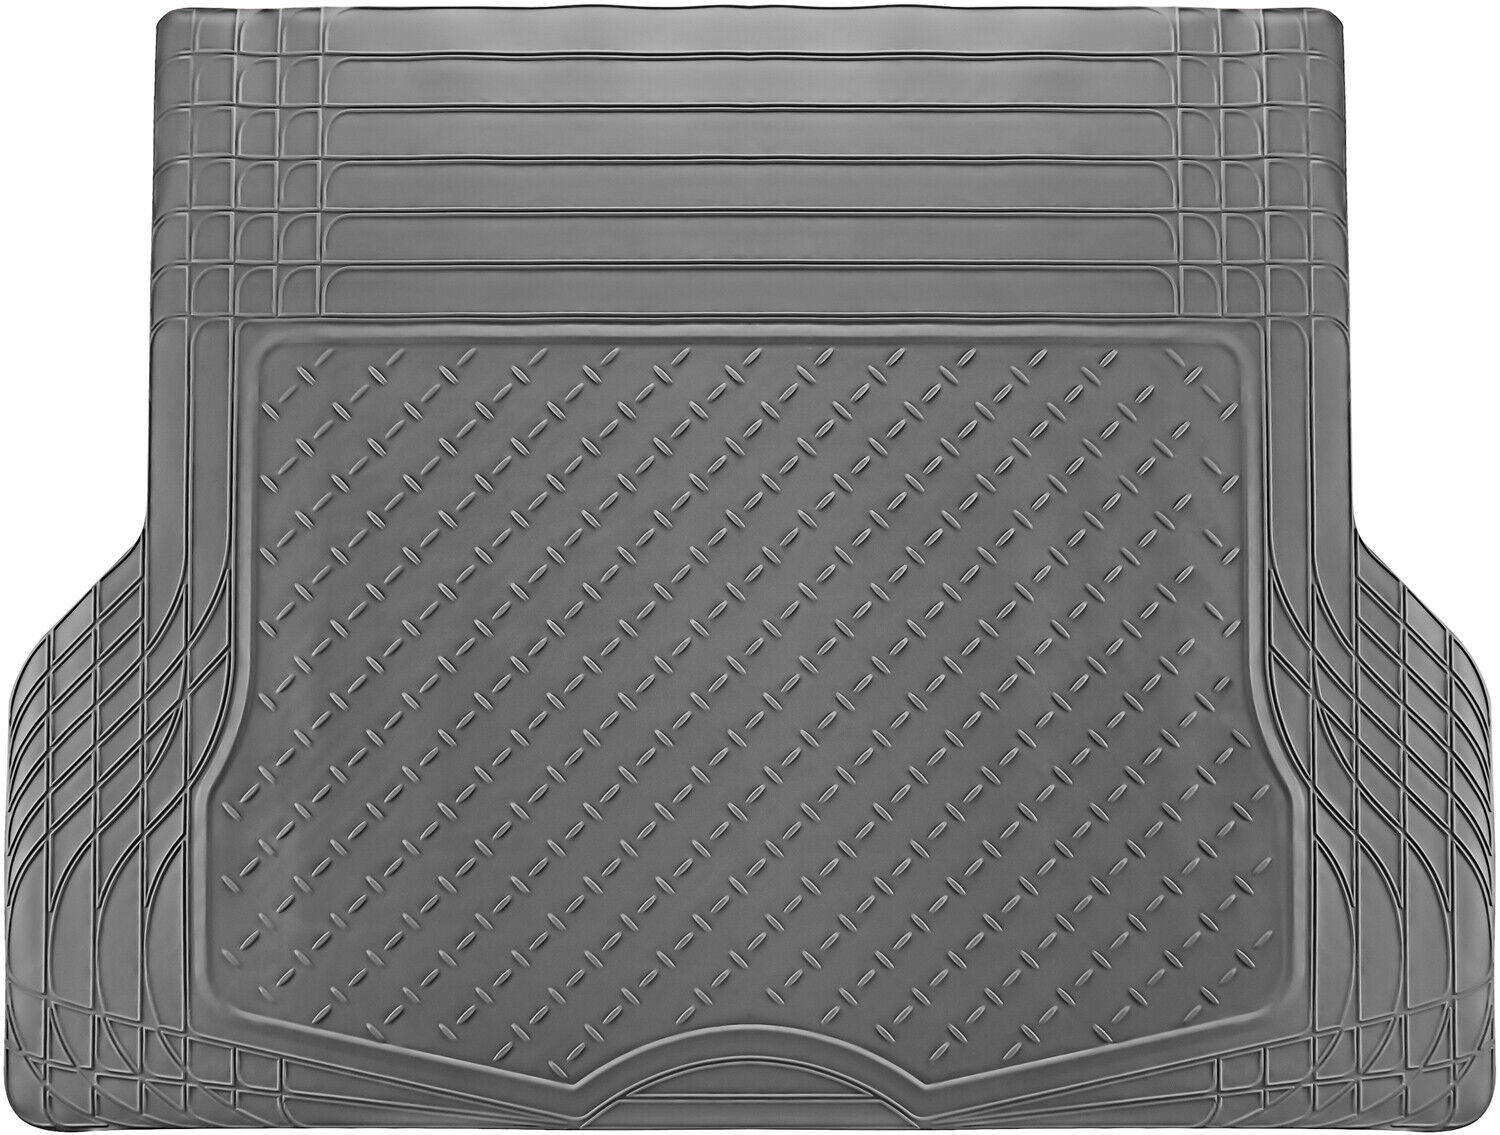 Trunk Cargo Floor Mats for SUV Van Truck All Weather Rubber Gray Auto Liners